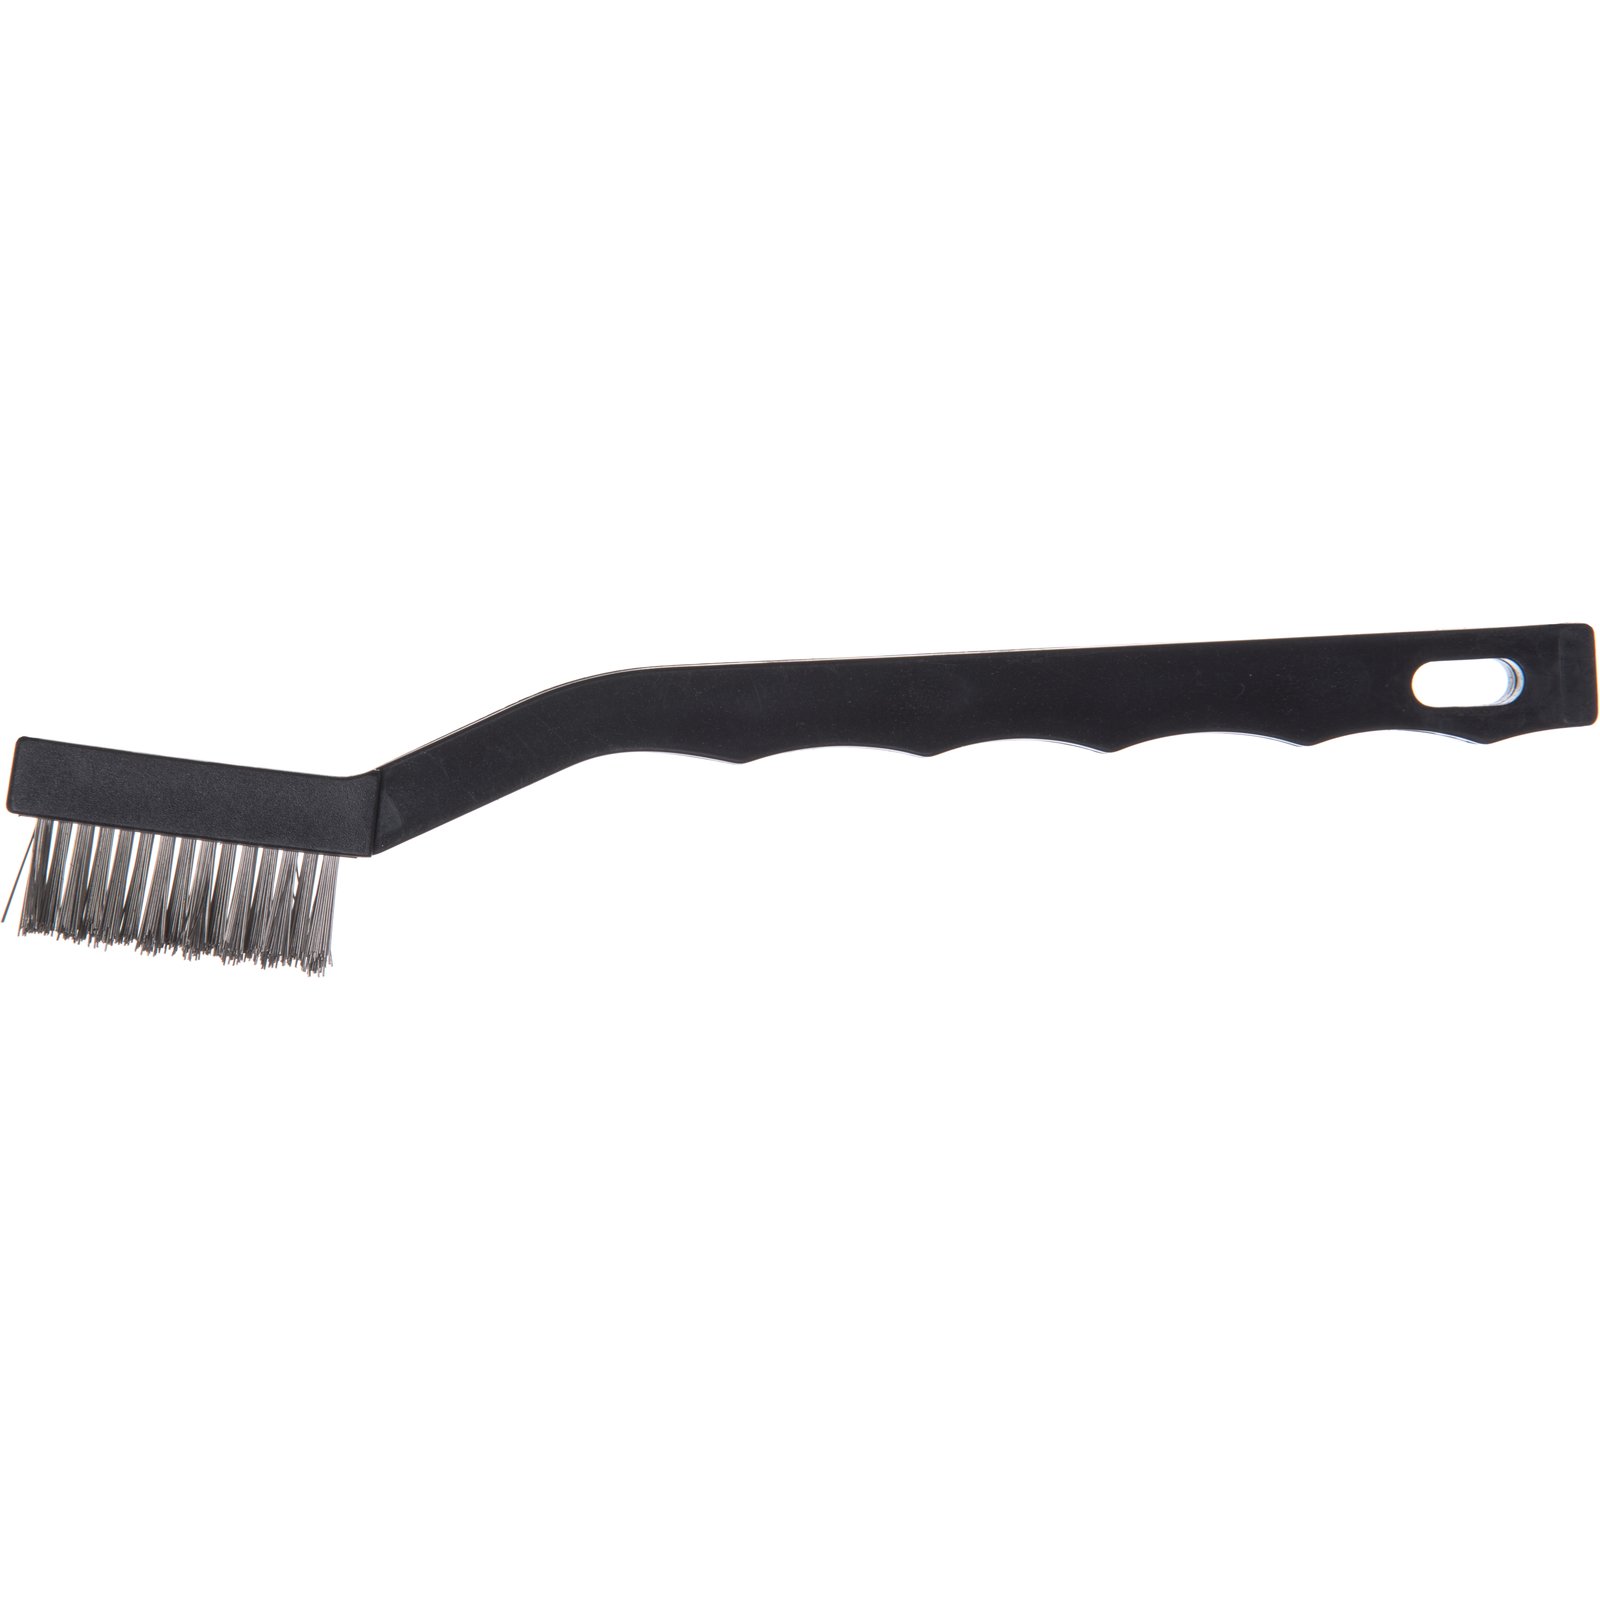 BRUSH UTILITY STAINLESS
STEEL 7&quot; 